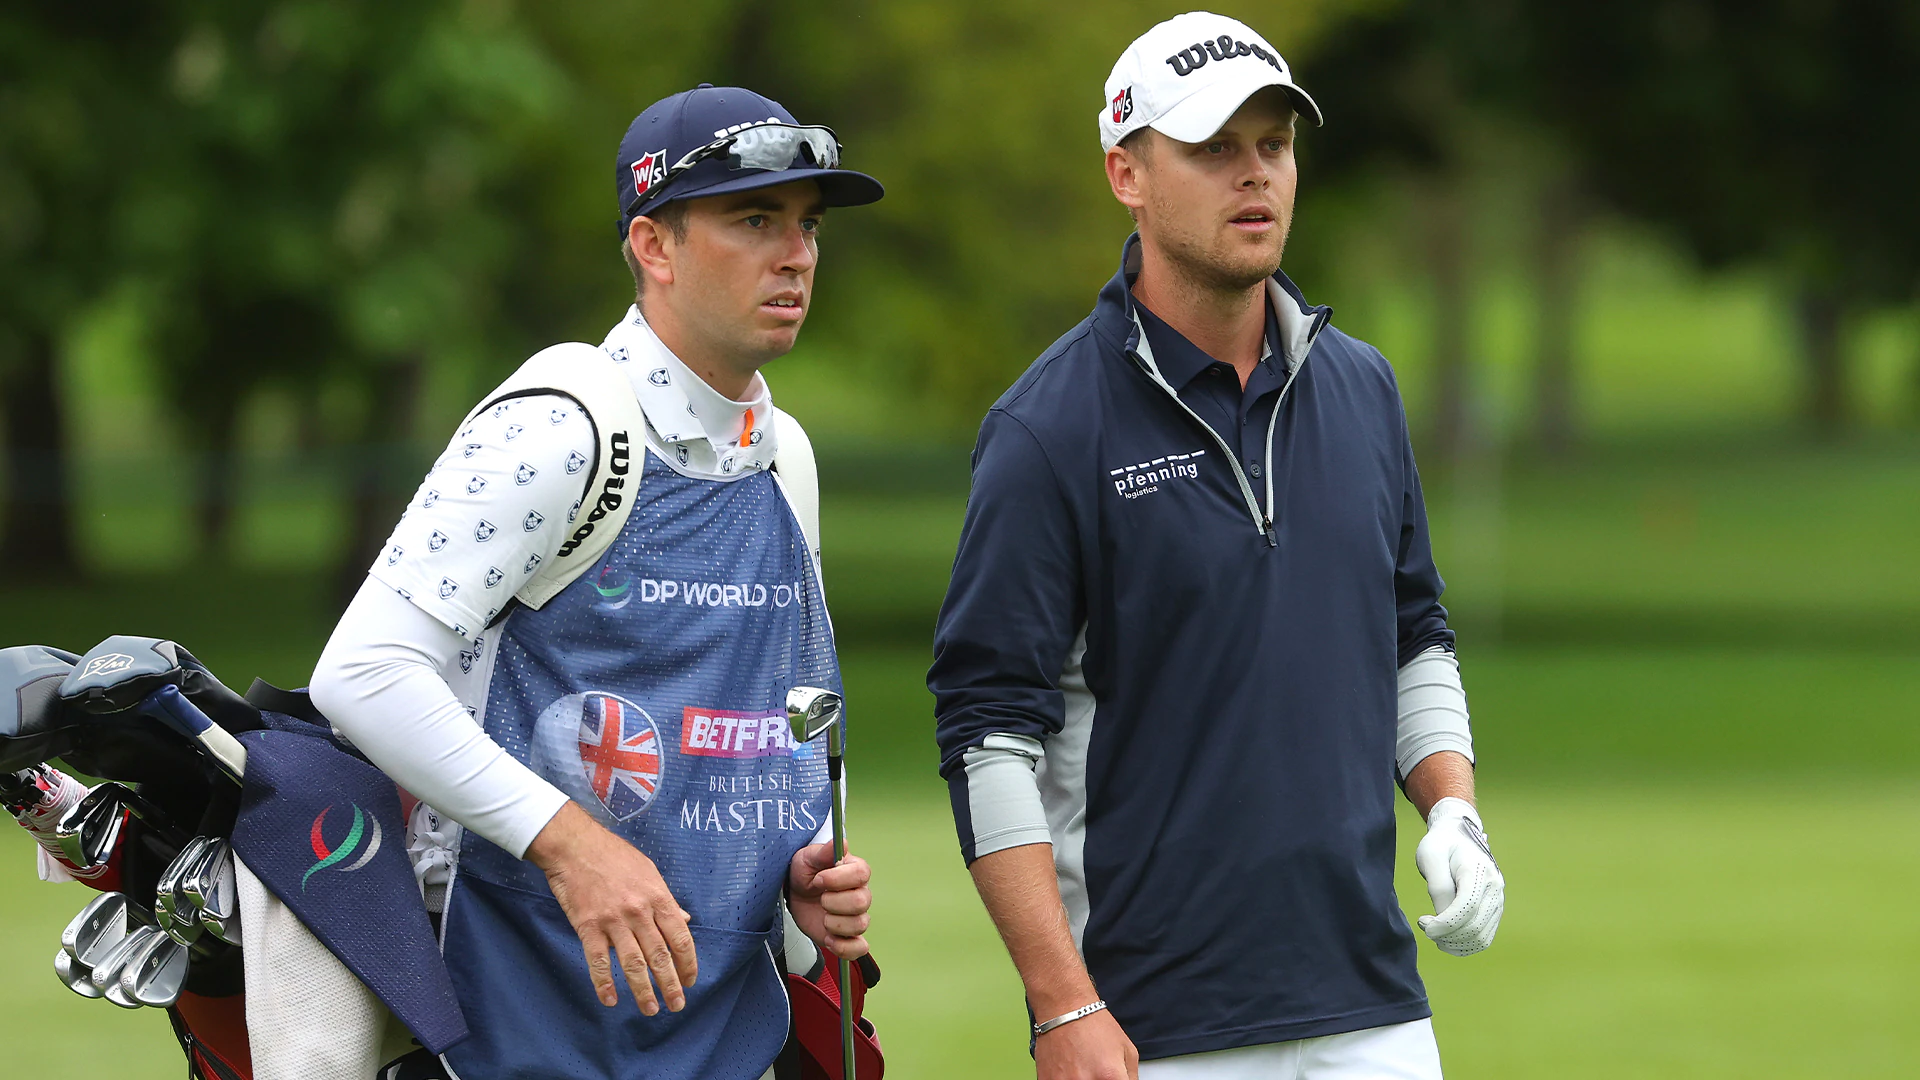 Hurly Long holds halfway British Masters lead with many within striking distance